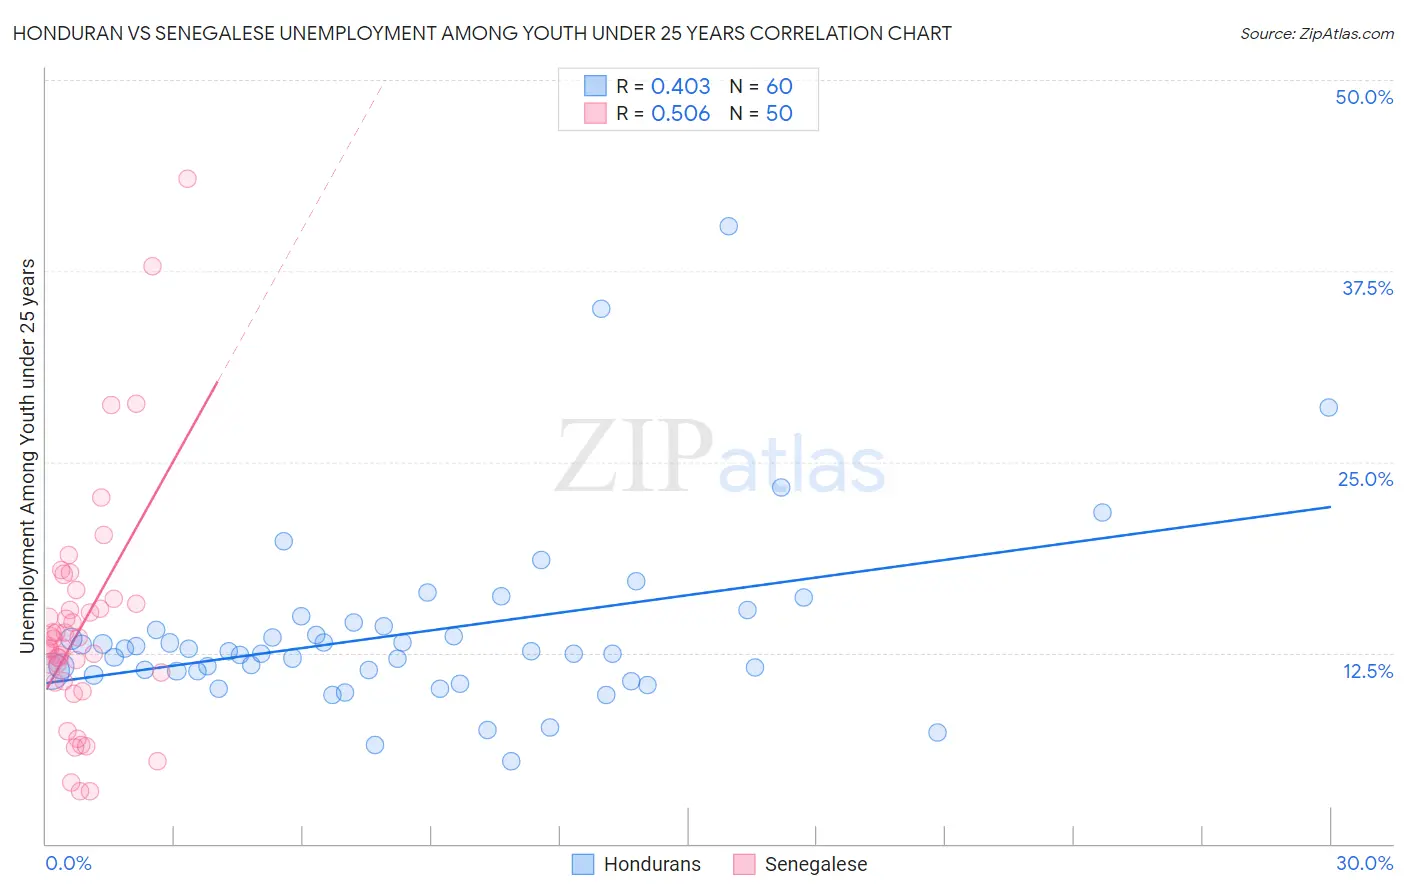 Honduran vs Senegalese Unemployment Among Youth under 25 years